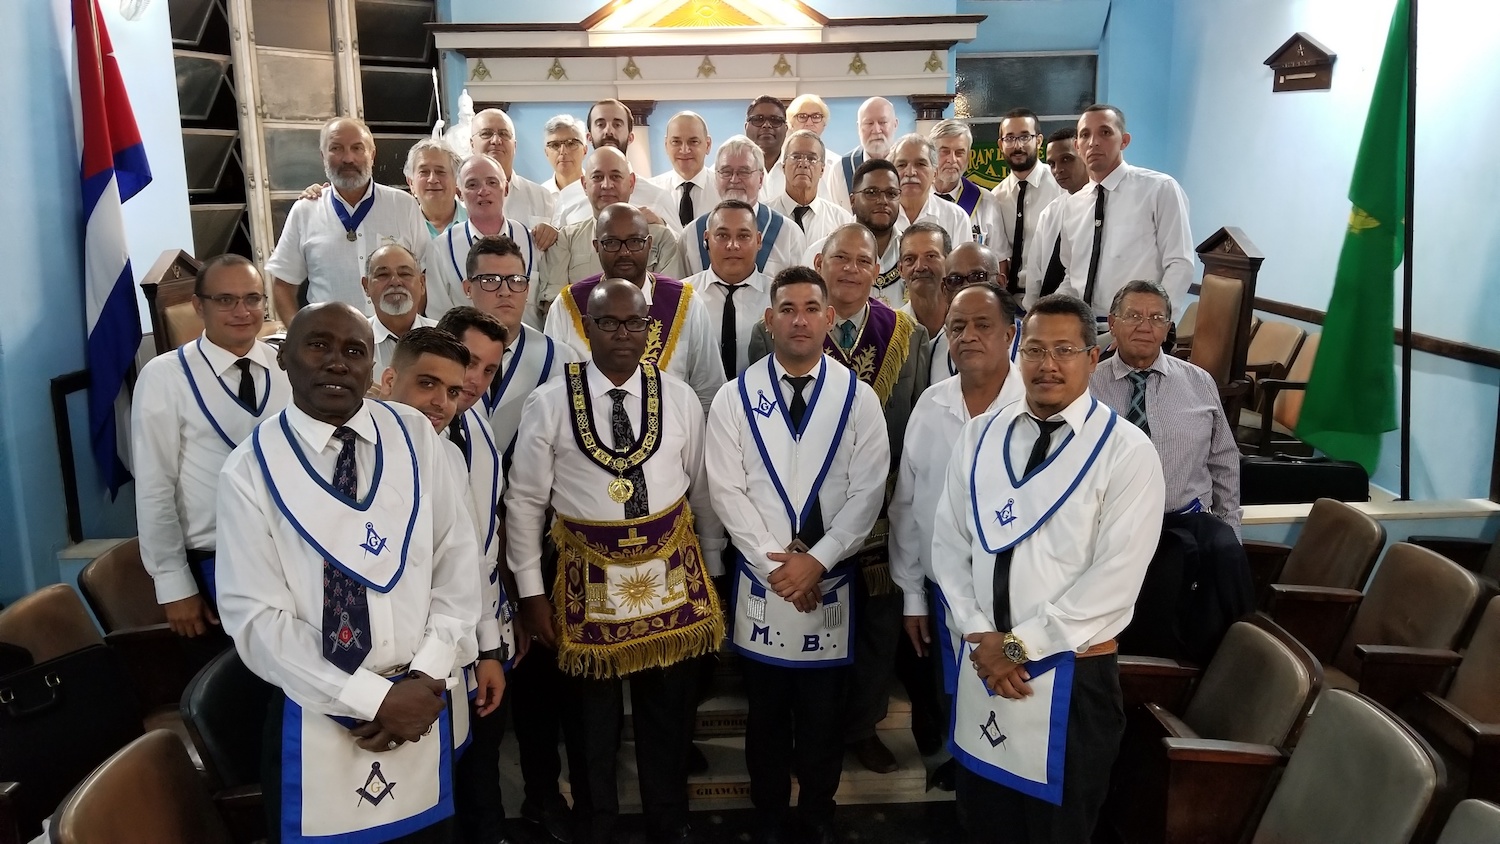 Members of Lodge Jose Naken with M∴W∴ Zamora Grand Master, the Grand Marshal, and the Grand Secretary